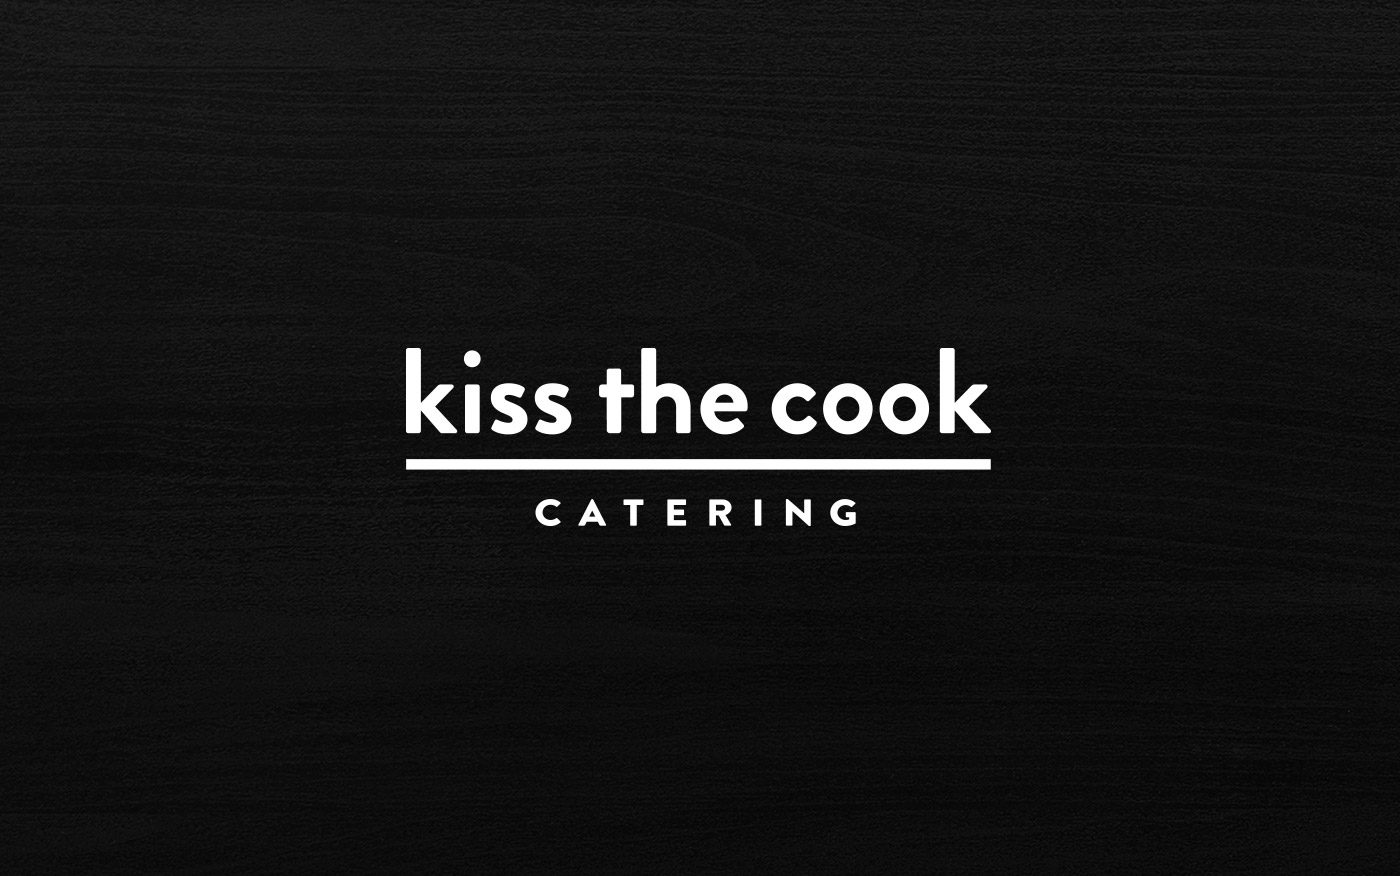 Kiss the Cook Catering Branding